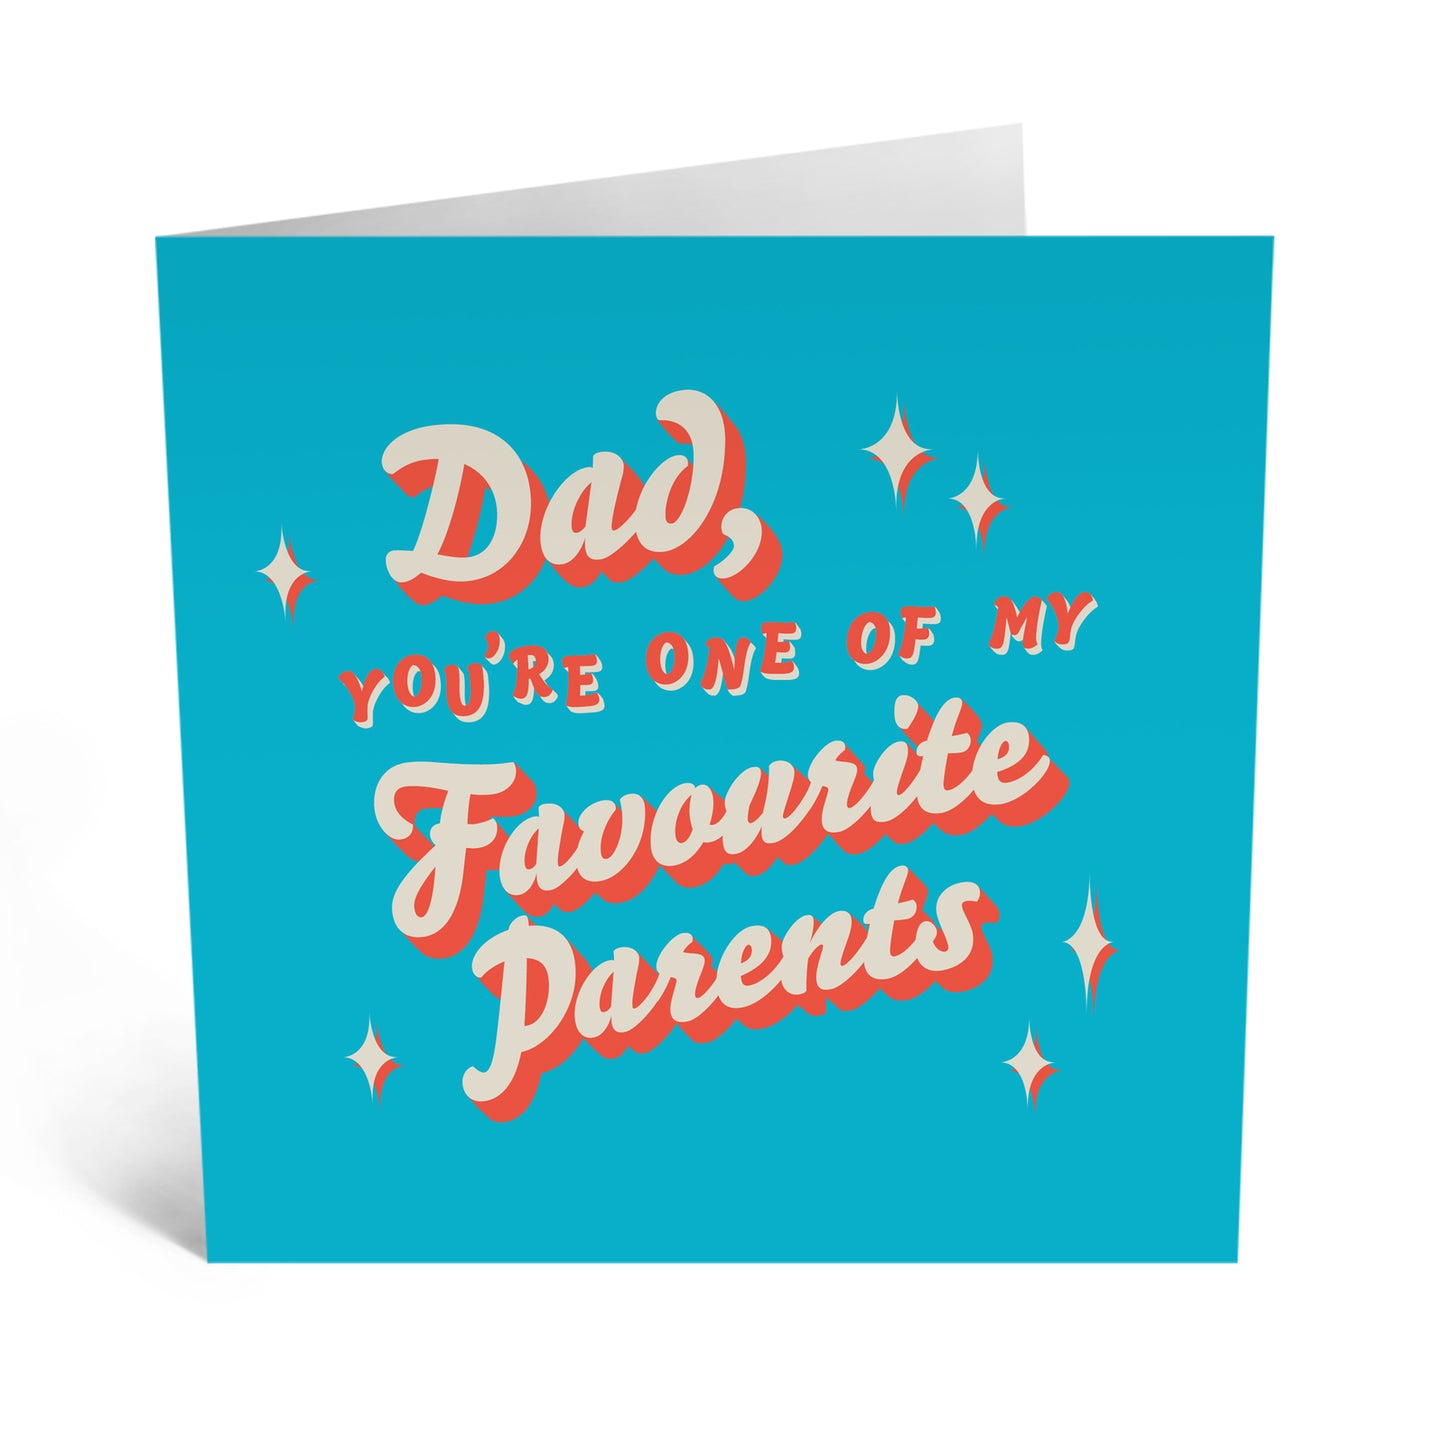 Dad You're One of my Favourite Parents Cards